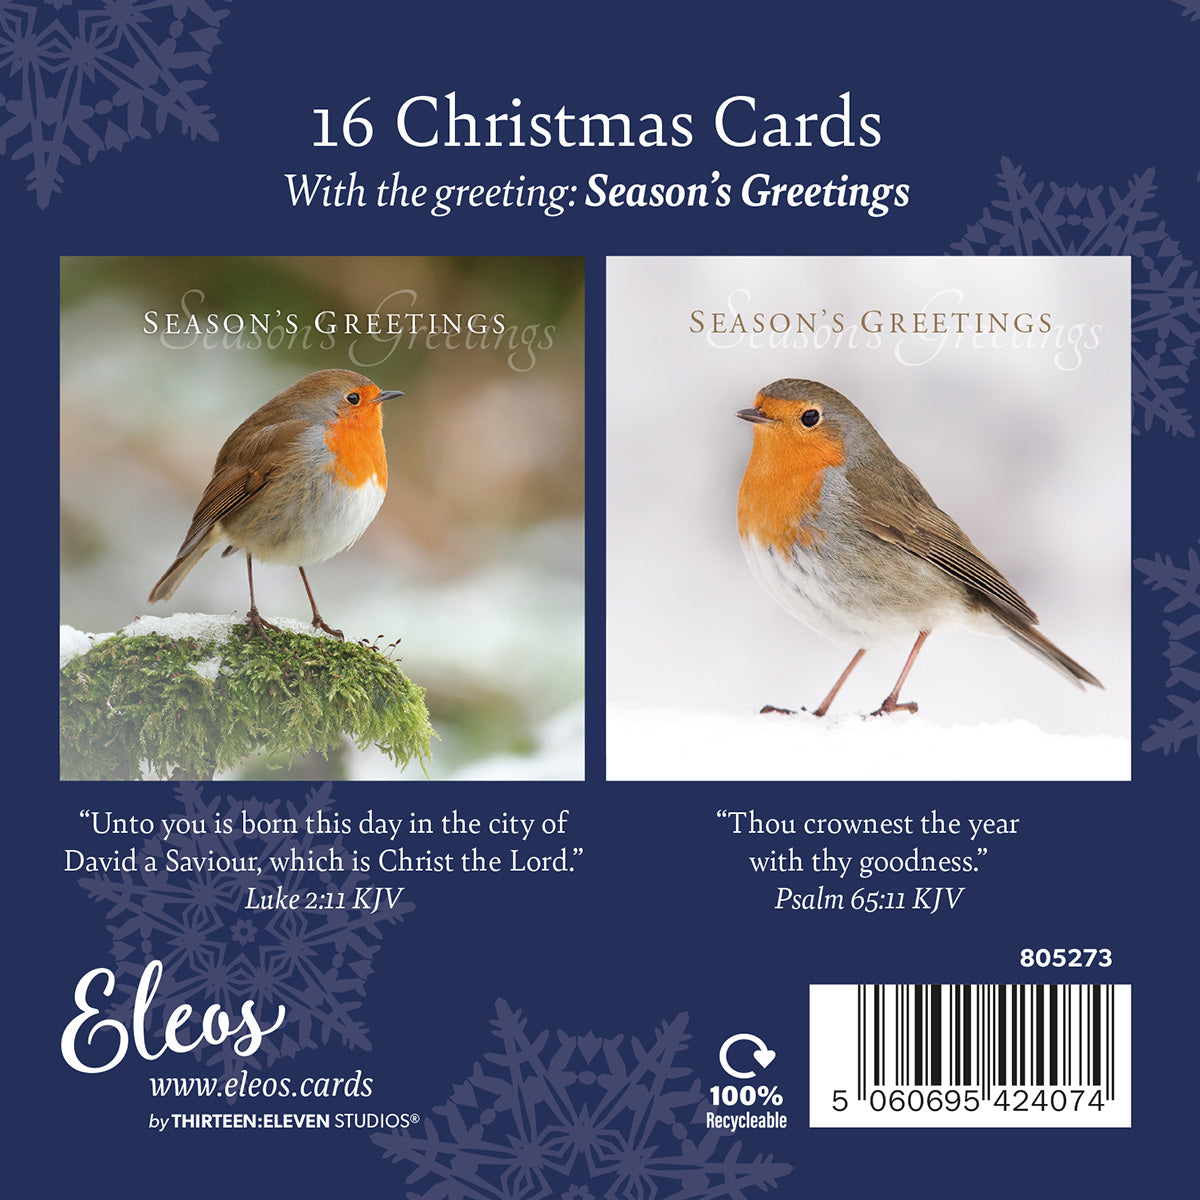 Christmas Card Pack - Robins (16 cards) - The Christian Gift Company